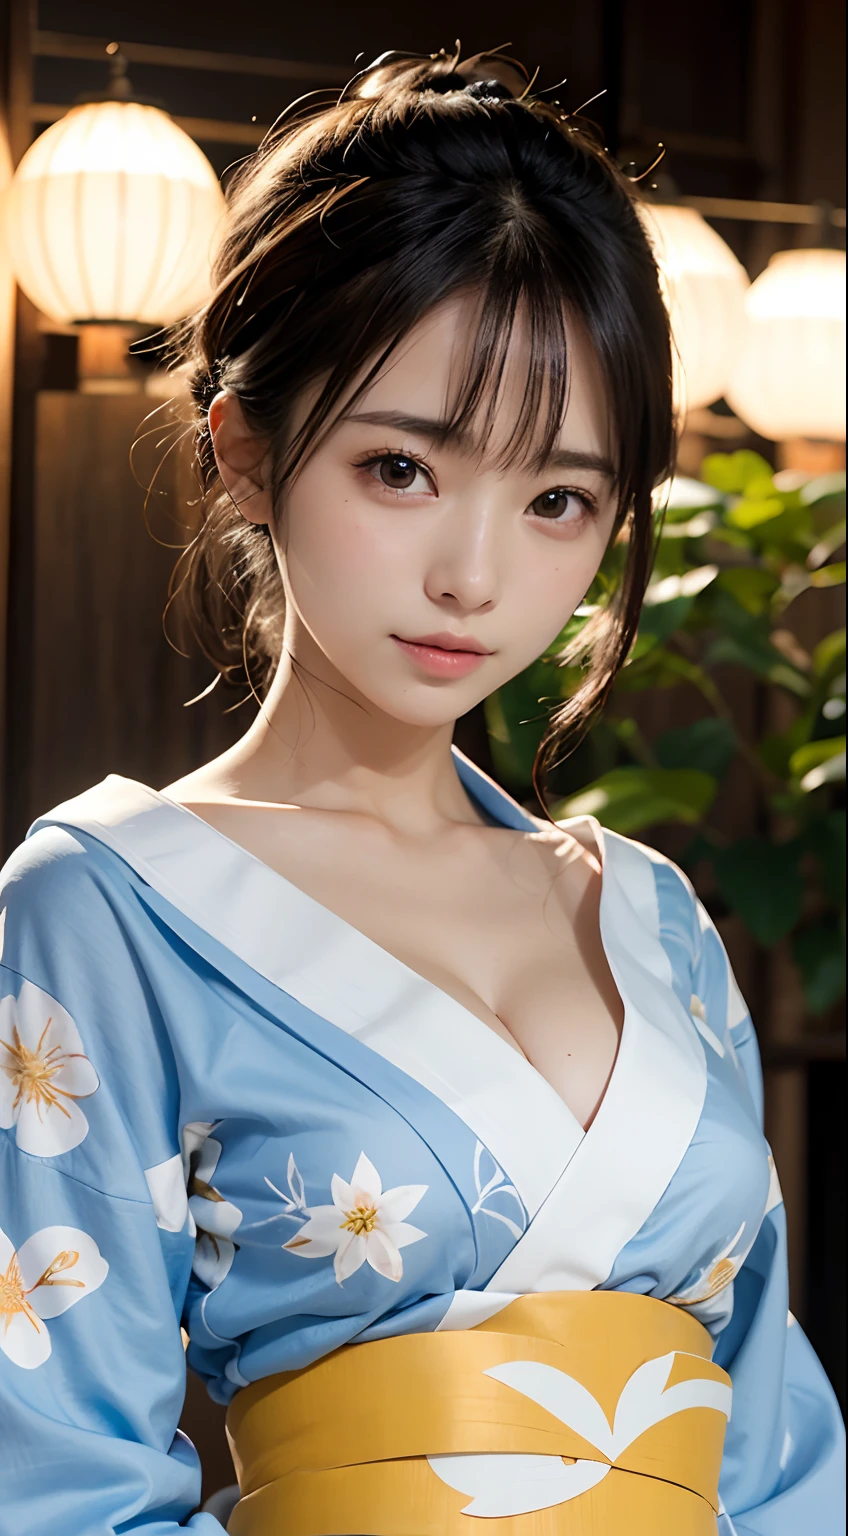 (masutepiece, Best Quality:1.4), Beautiful face, 8K, 85 mm, absurderes, (floral pattern yukata:1.4), The upper part of the body, Exposing breasts、 violaceaess, gardeniass, Delicate girl, Solo, Night, Looking at Viewer, Upper body, Film grain, chromatic abberation, Sharp Focus, face lights, Professional Lighting, Sophisticated, (Smile:0.4), cleavage, (Simple background, Bokeh background:1.2), Detail Face